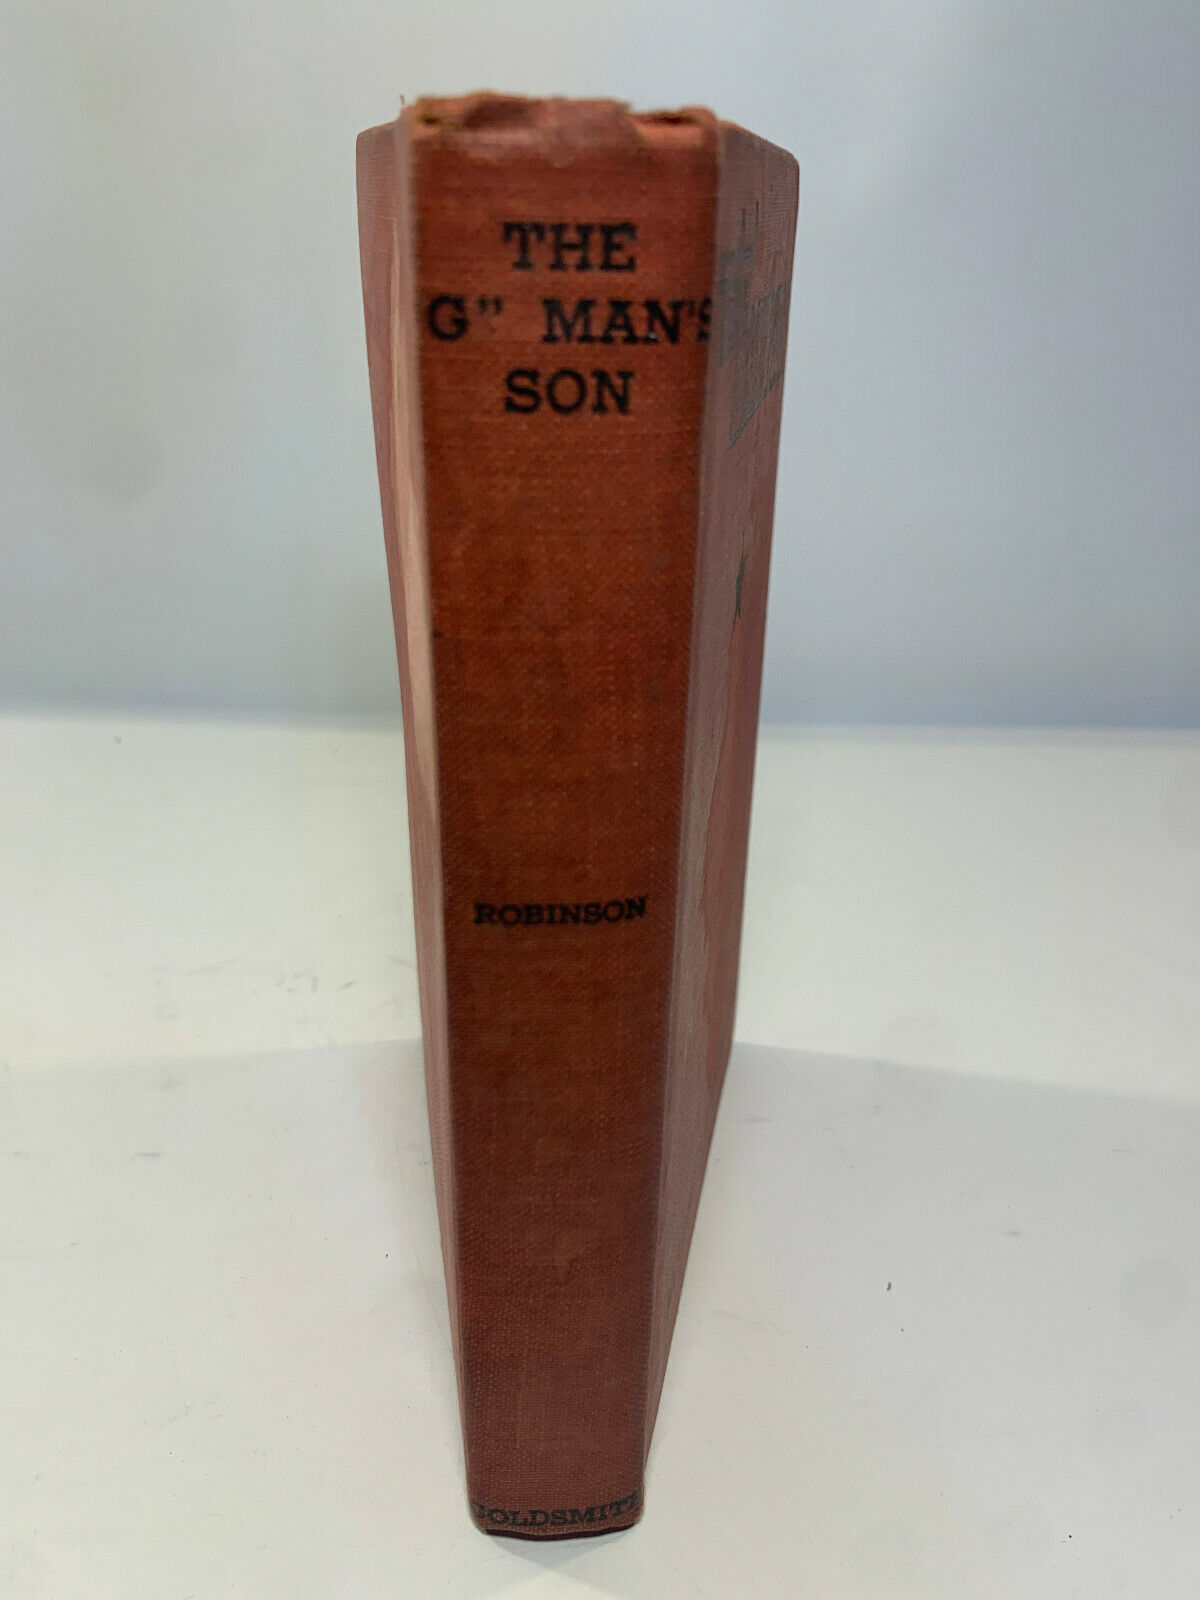 THE "G" MAN'S SON at PORPOISE ISLAND by Warren F. Robinson 1937 Goldsmith (A1)